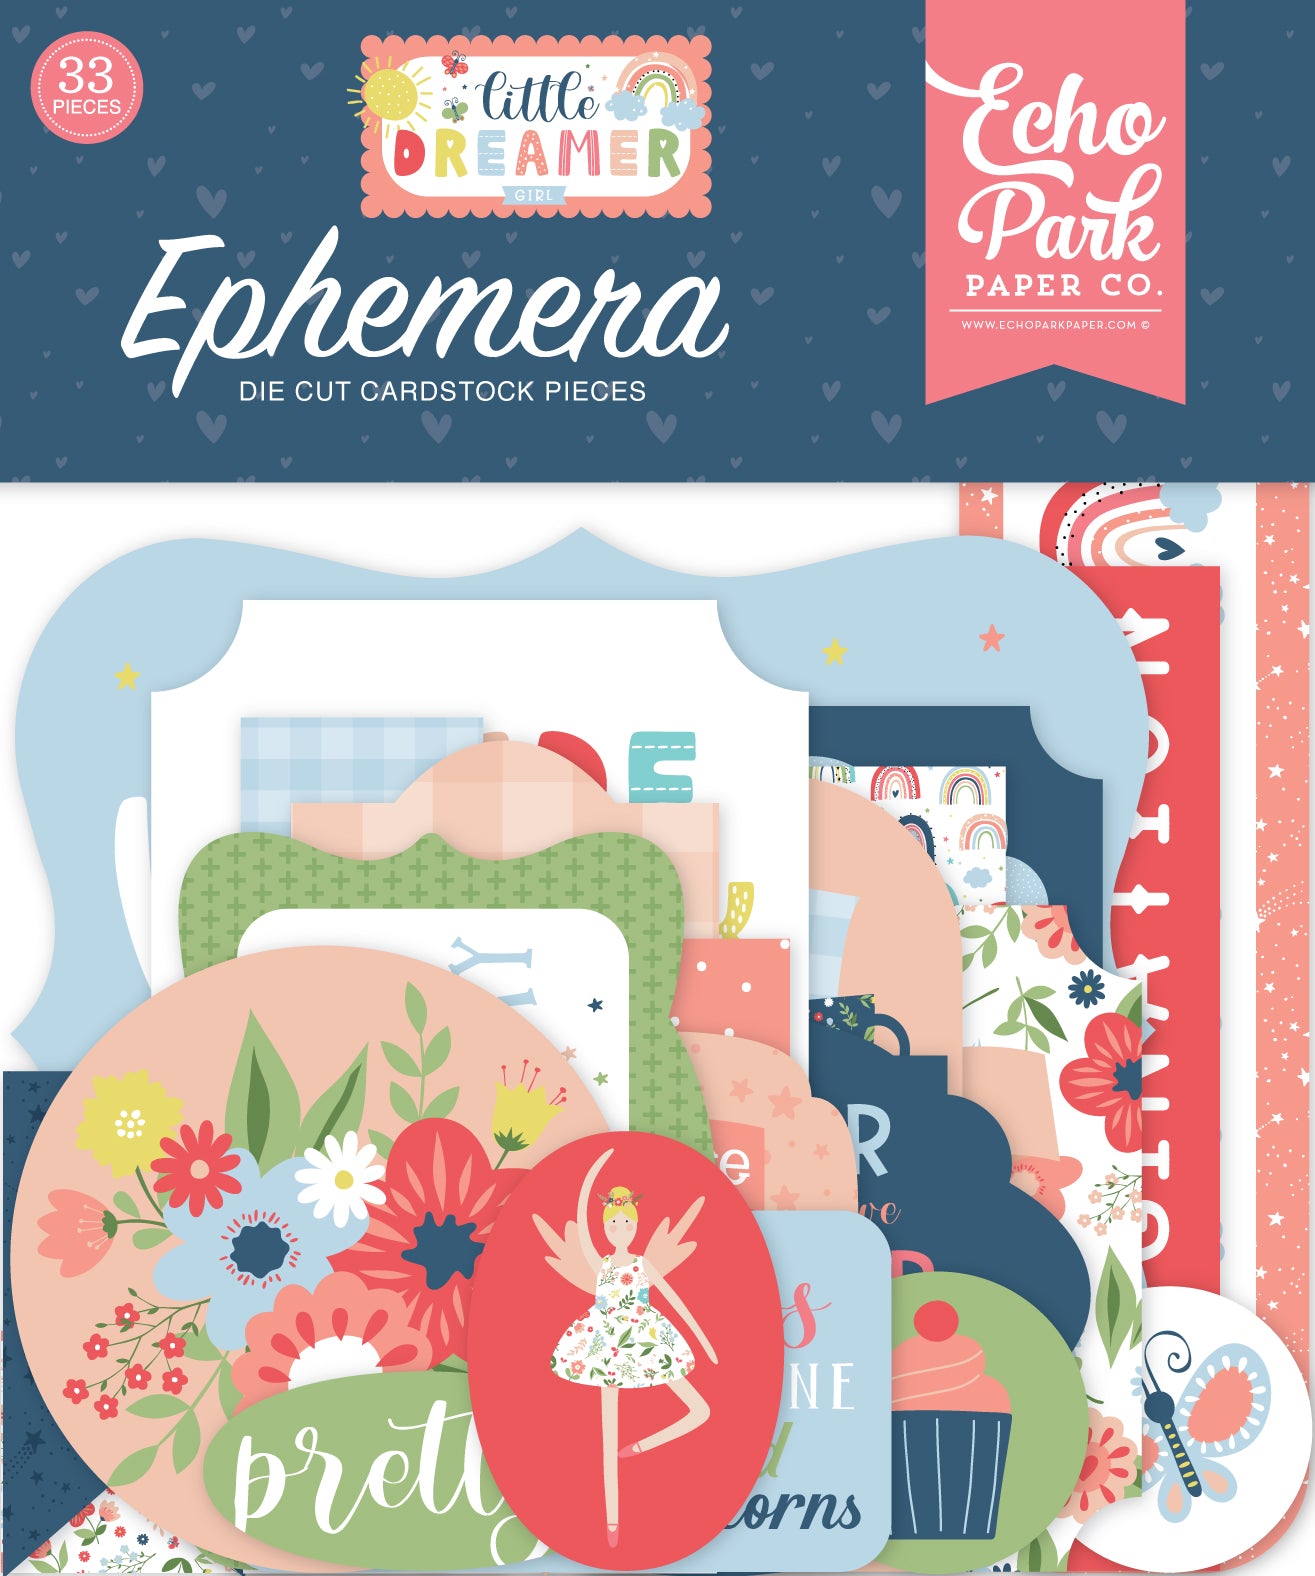 Little Dreamer Girl Ephemera Die Cut Cardstock Pack.  Pack includes 33 different die-cut shapes ready to embellish any project.